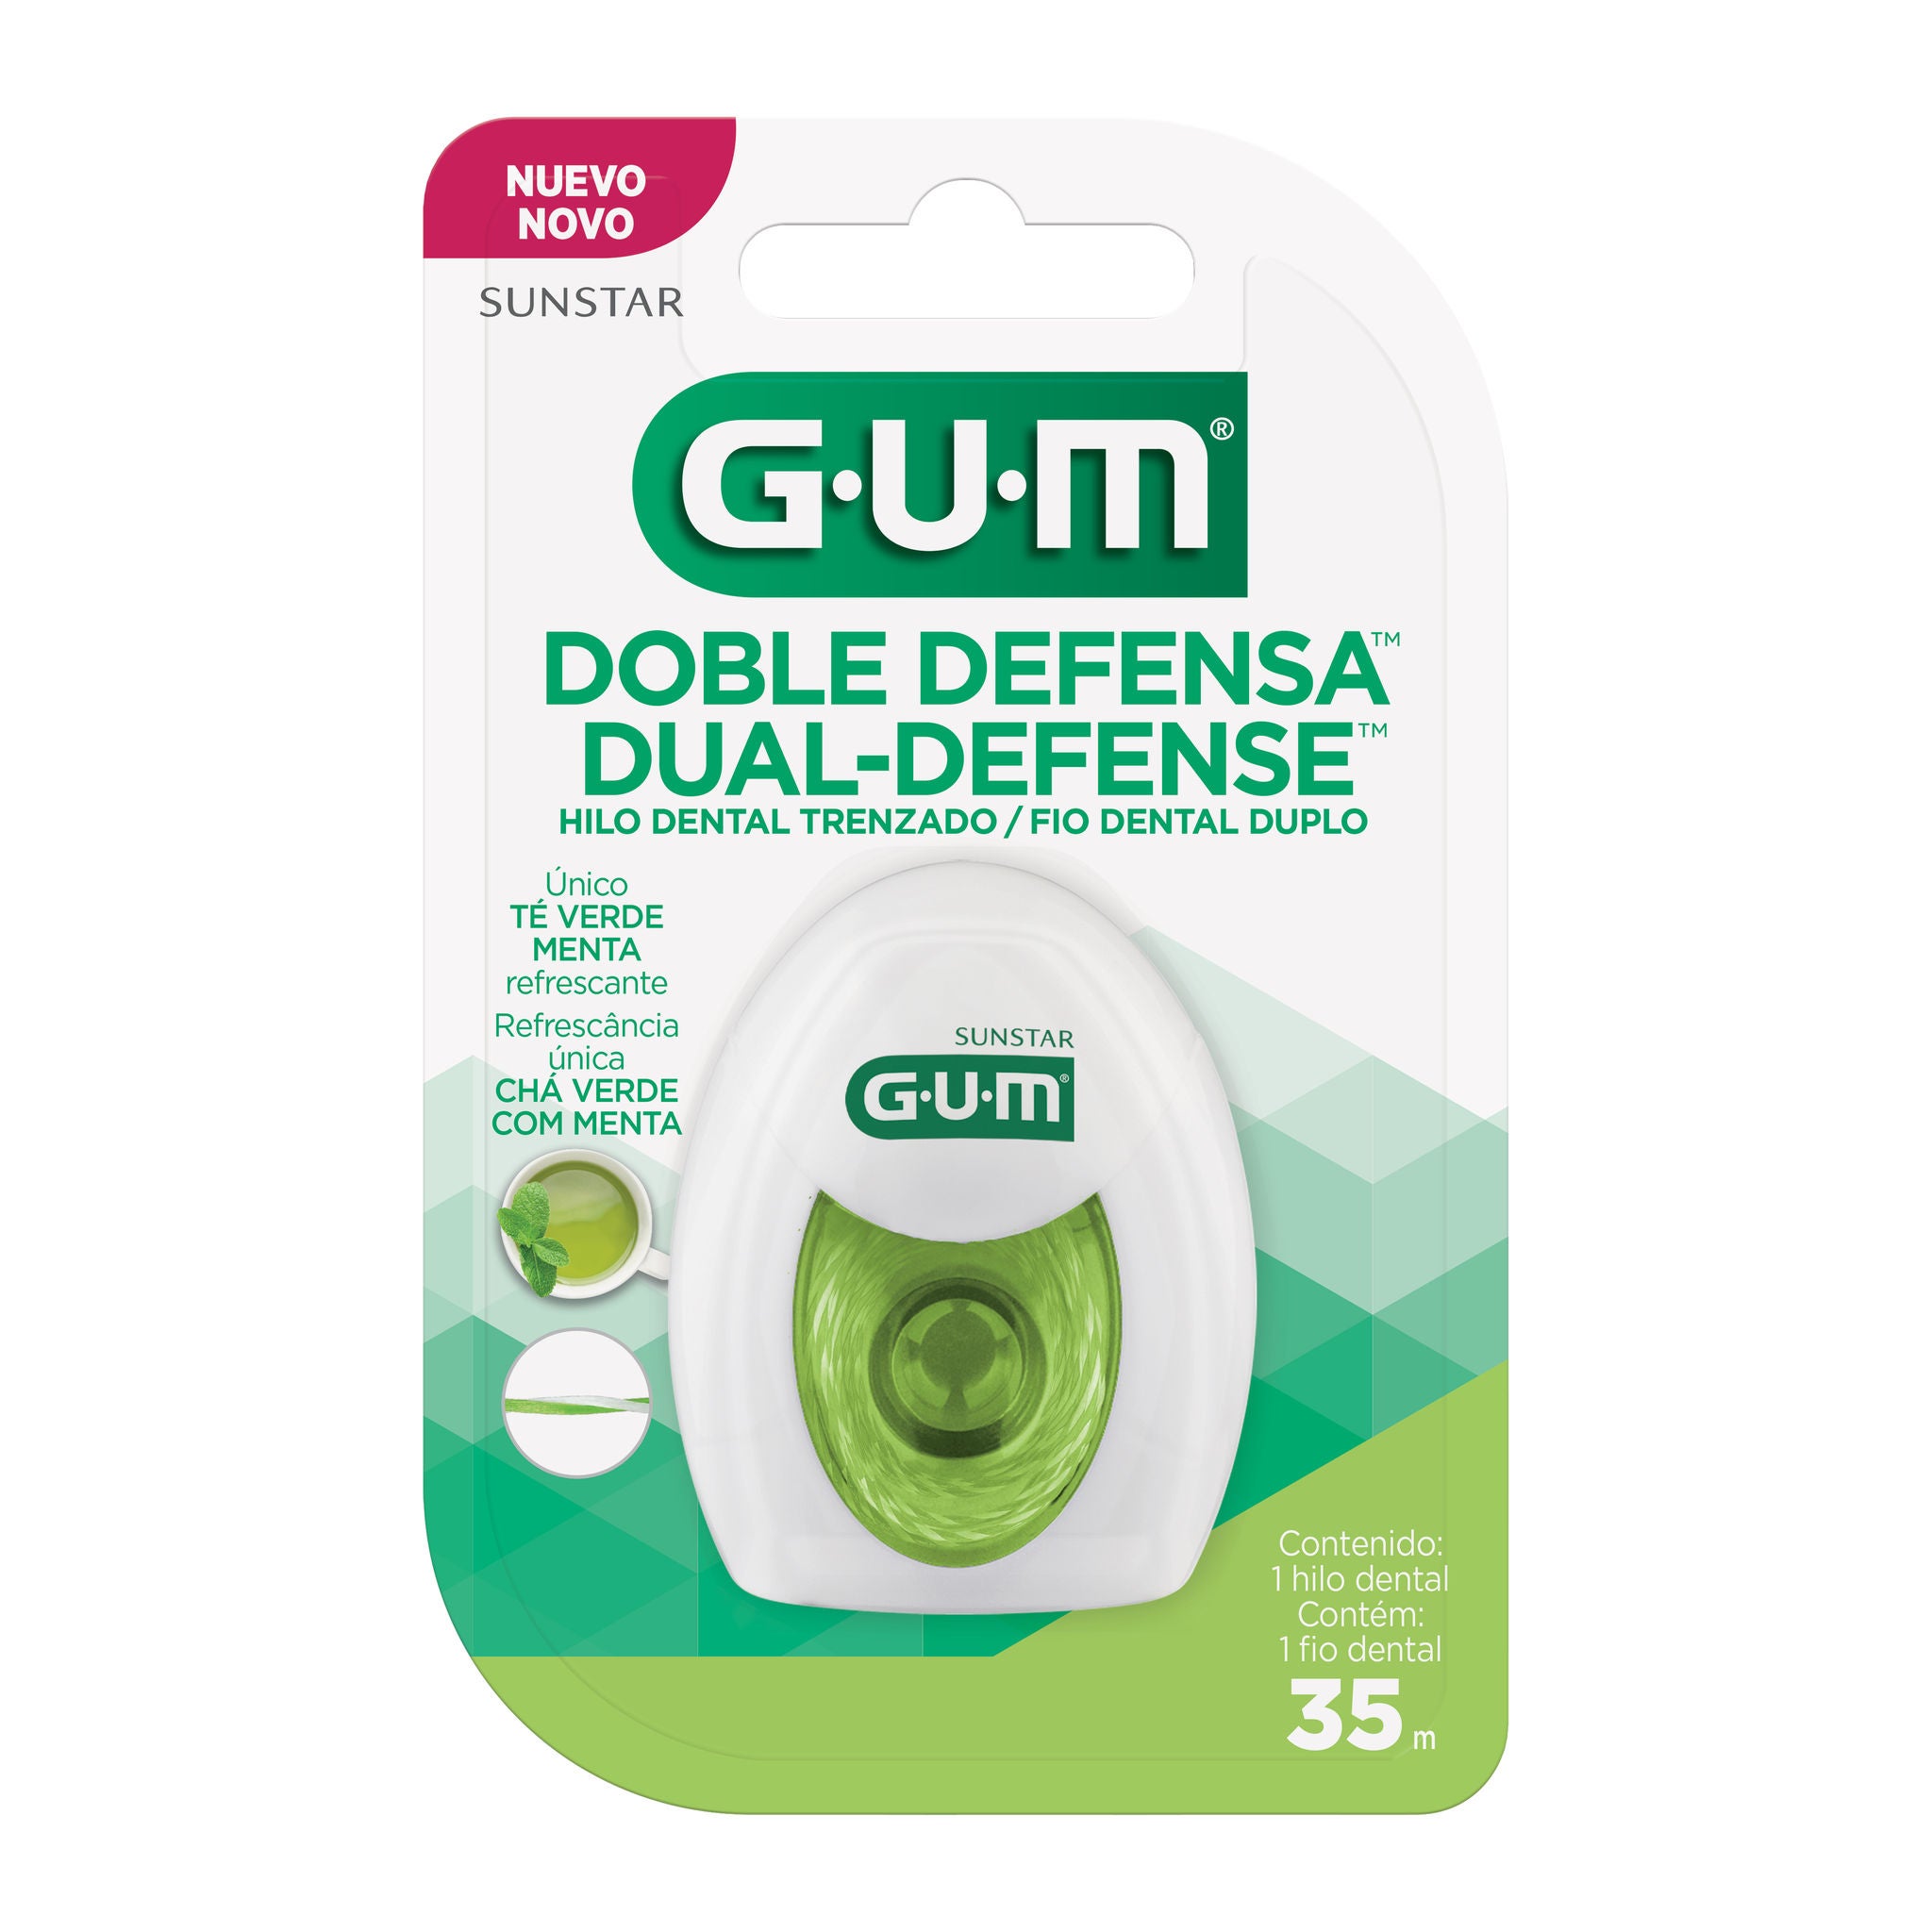 2008LY-Product-Packaging-Floss-DualDefense-front-35m.jpg